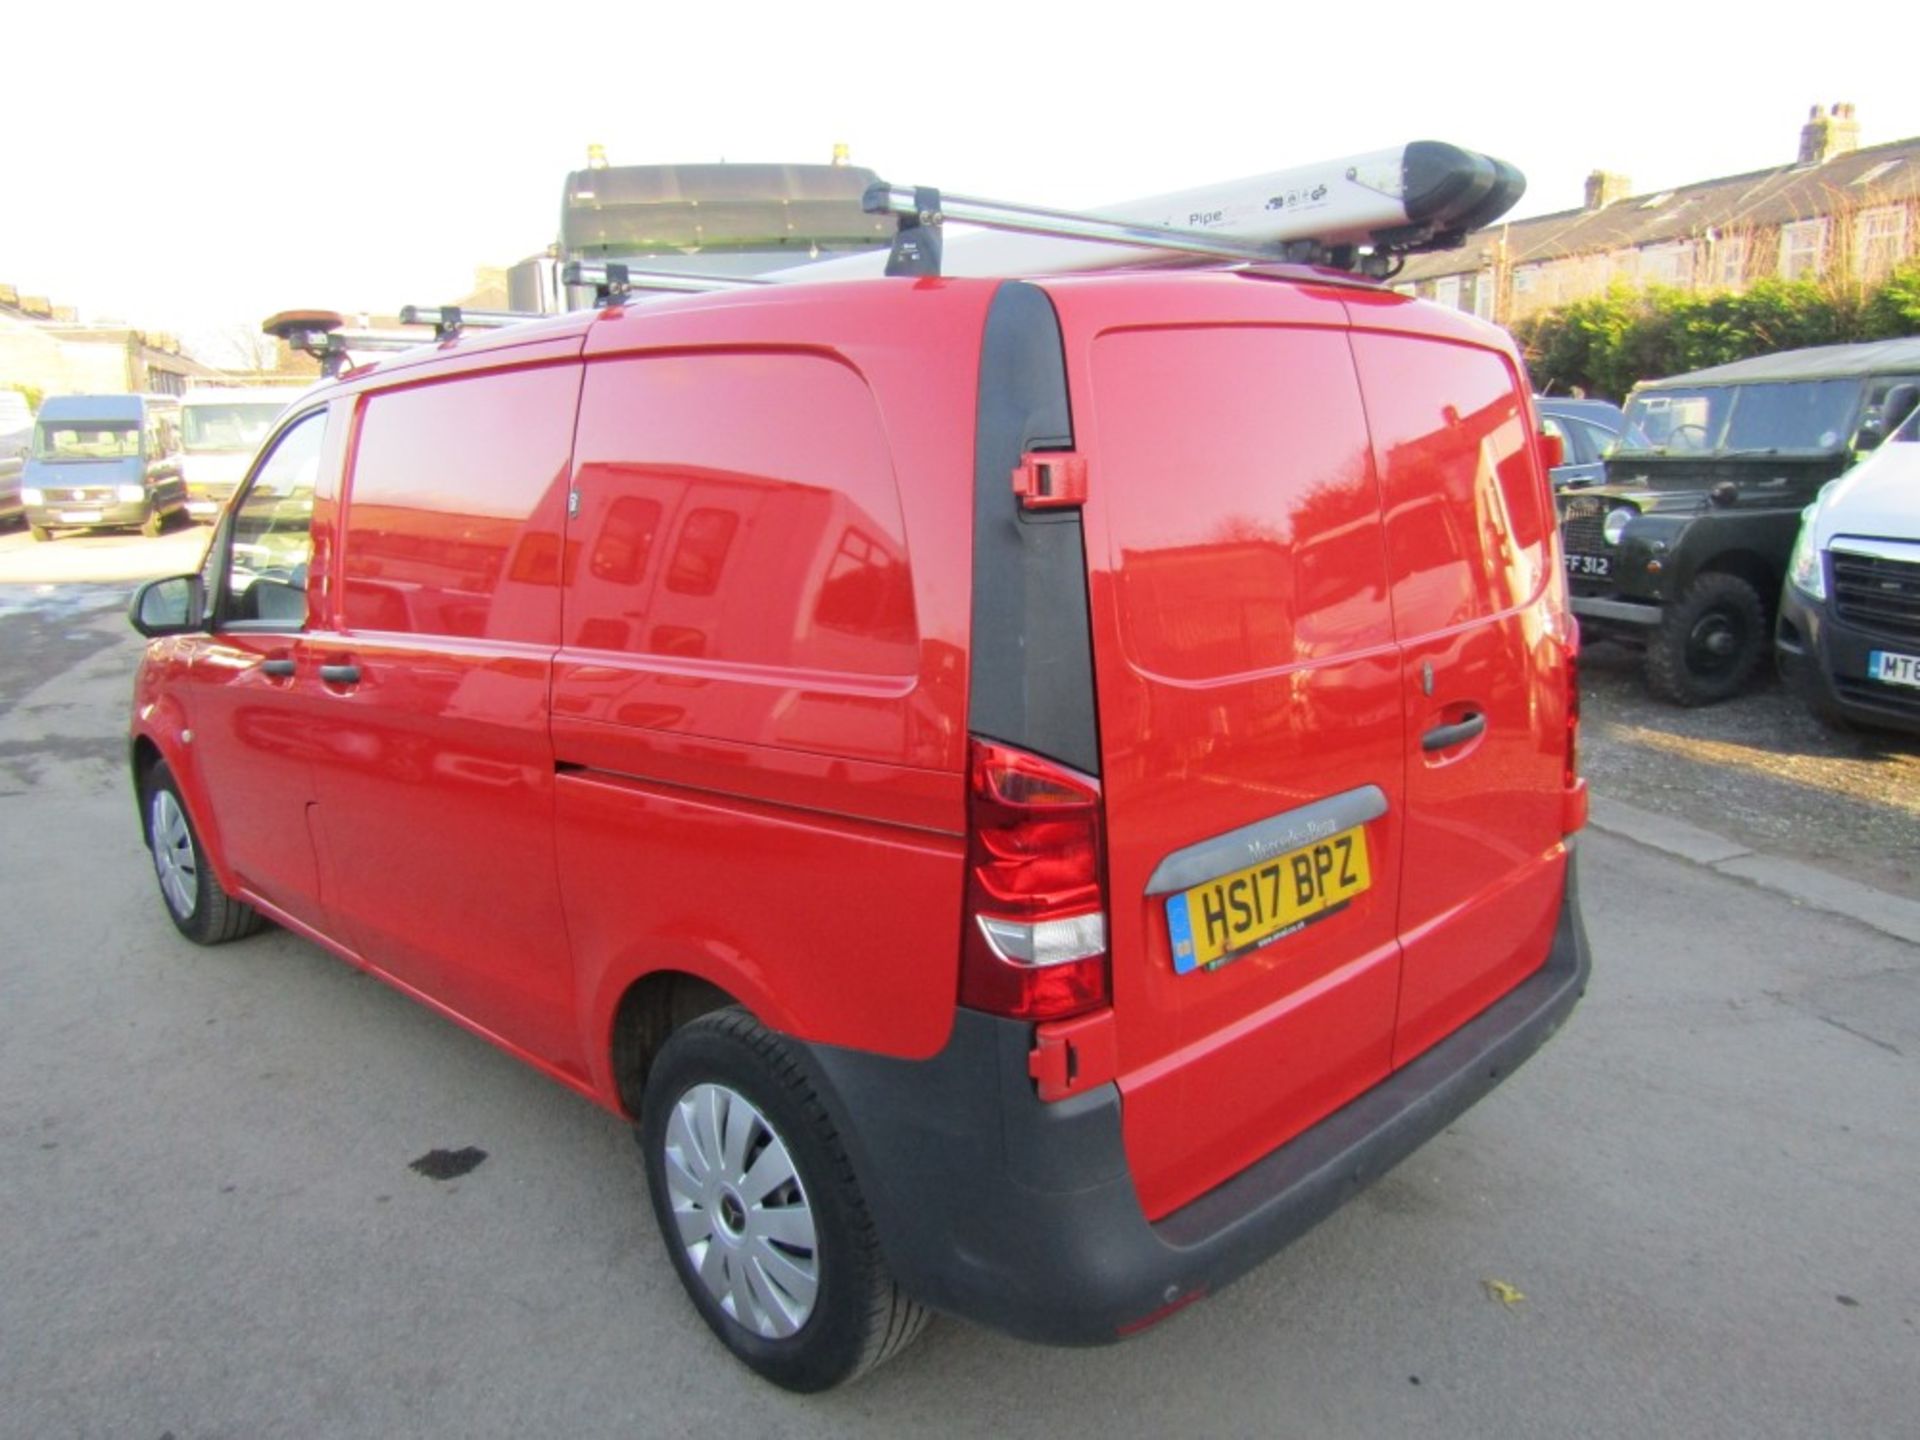 17 reg MERCEDES VITO 109 CDI COMPACT, AIR CON, SAT NAV, BLUE TOOTH, RACKING IN REAR, 1ST REG 07/ - Image 3 of 7